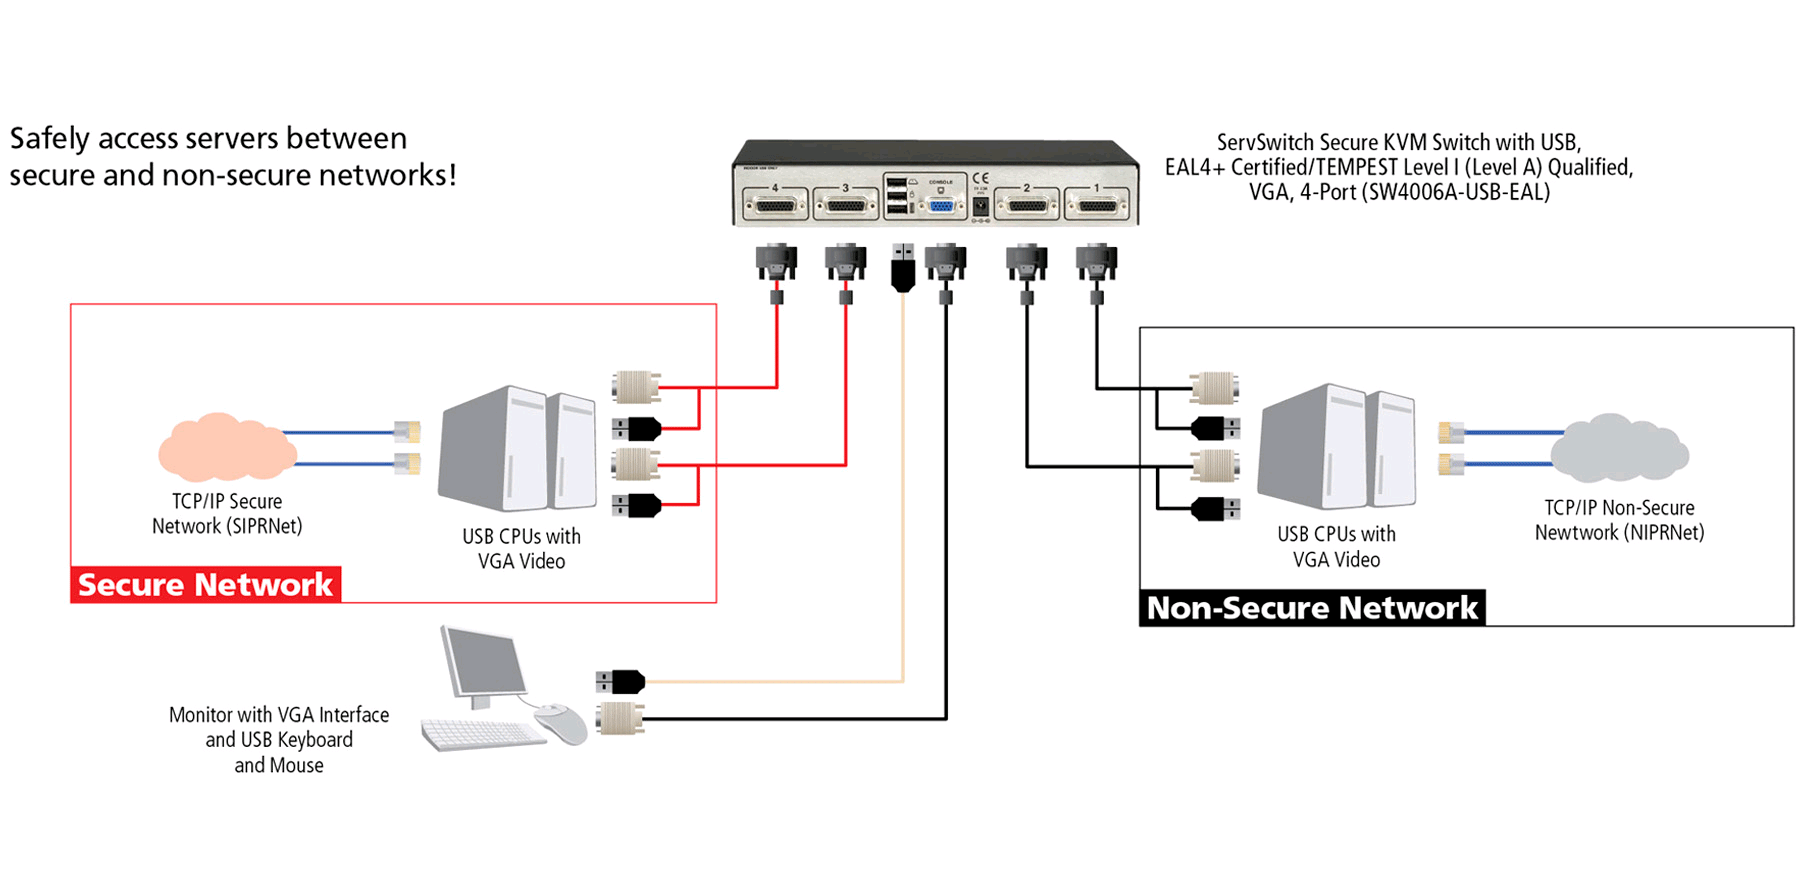 Safely access servers on secure and non-secure networks using Black Box’s EAL4+ certified ServSwitch™ Secure KVM Switch with USB, which offers TEMPEST USA NSTISSAM Level I/NATO SDIP-27 Level A performance.